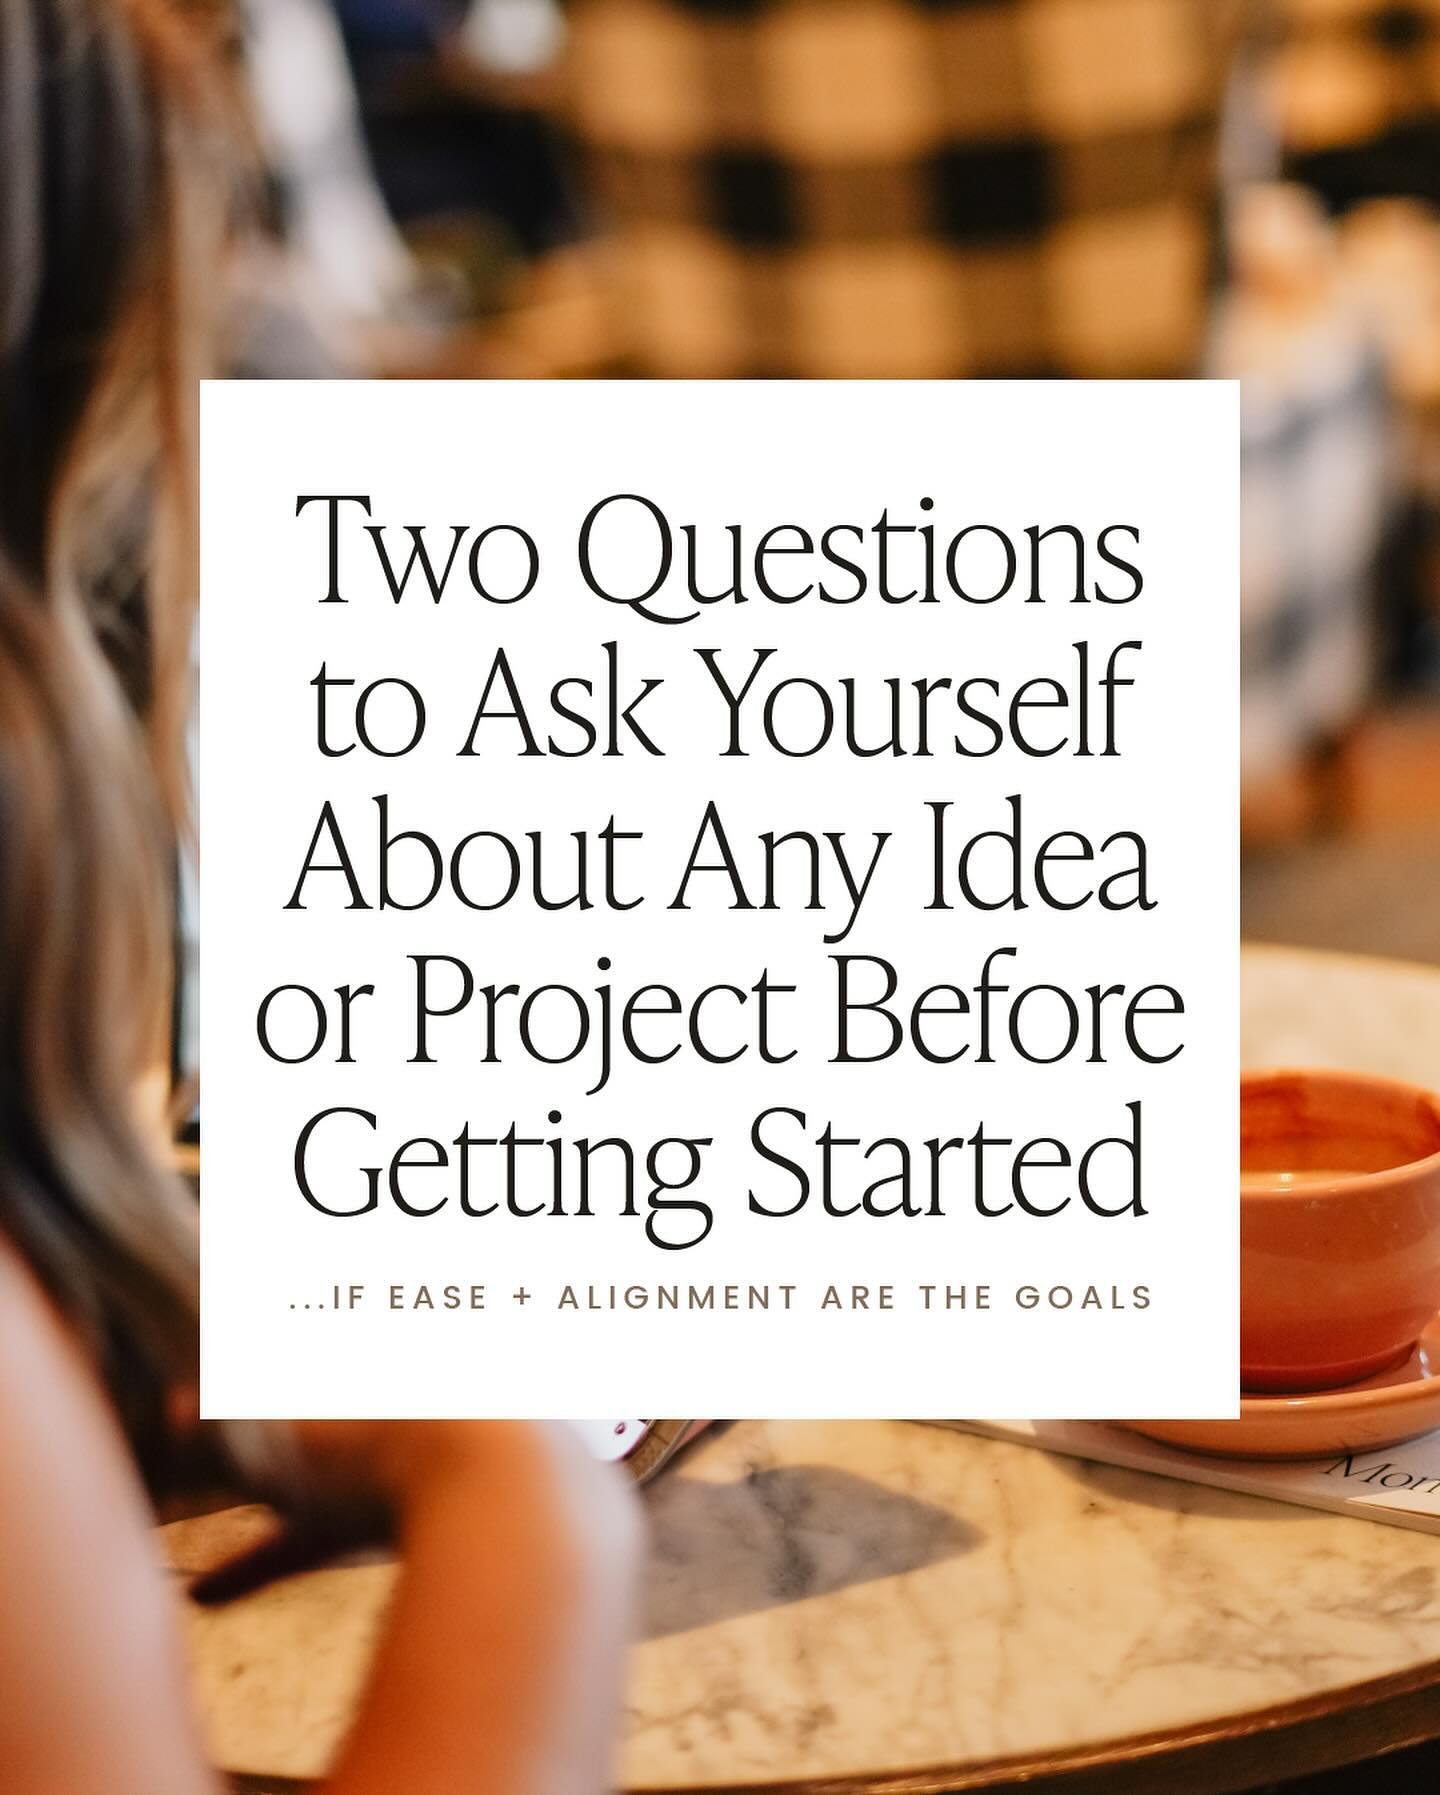 These questions are two of the guiding thoughts in my coaching spaces&mdash;

So imagine my surprise when podcast guest @cultivate.your.space shared her approach to interior design&hellip;

And these question helped guide her work with clients, too!
